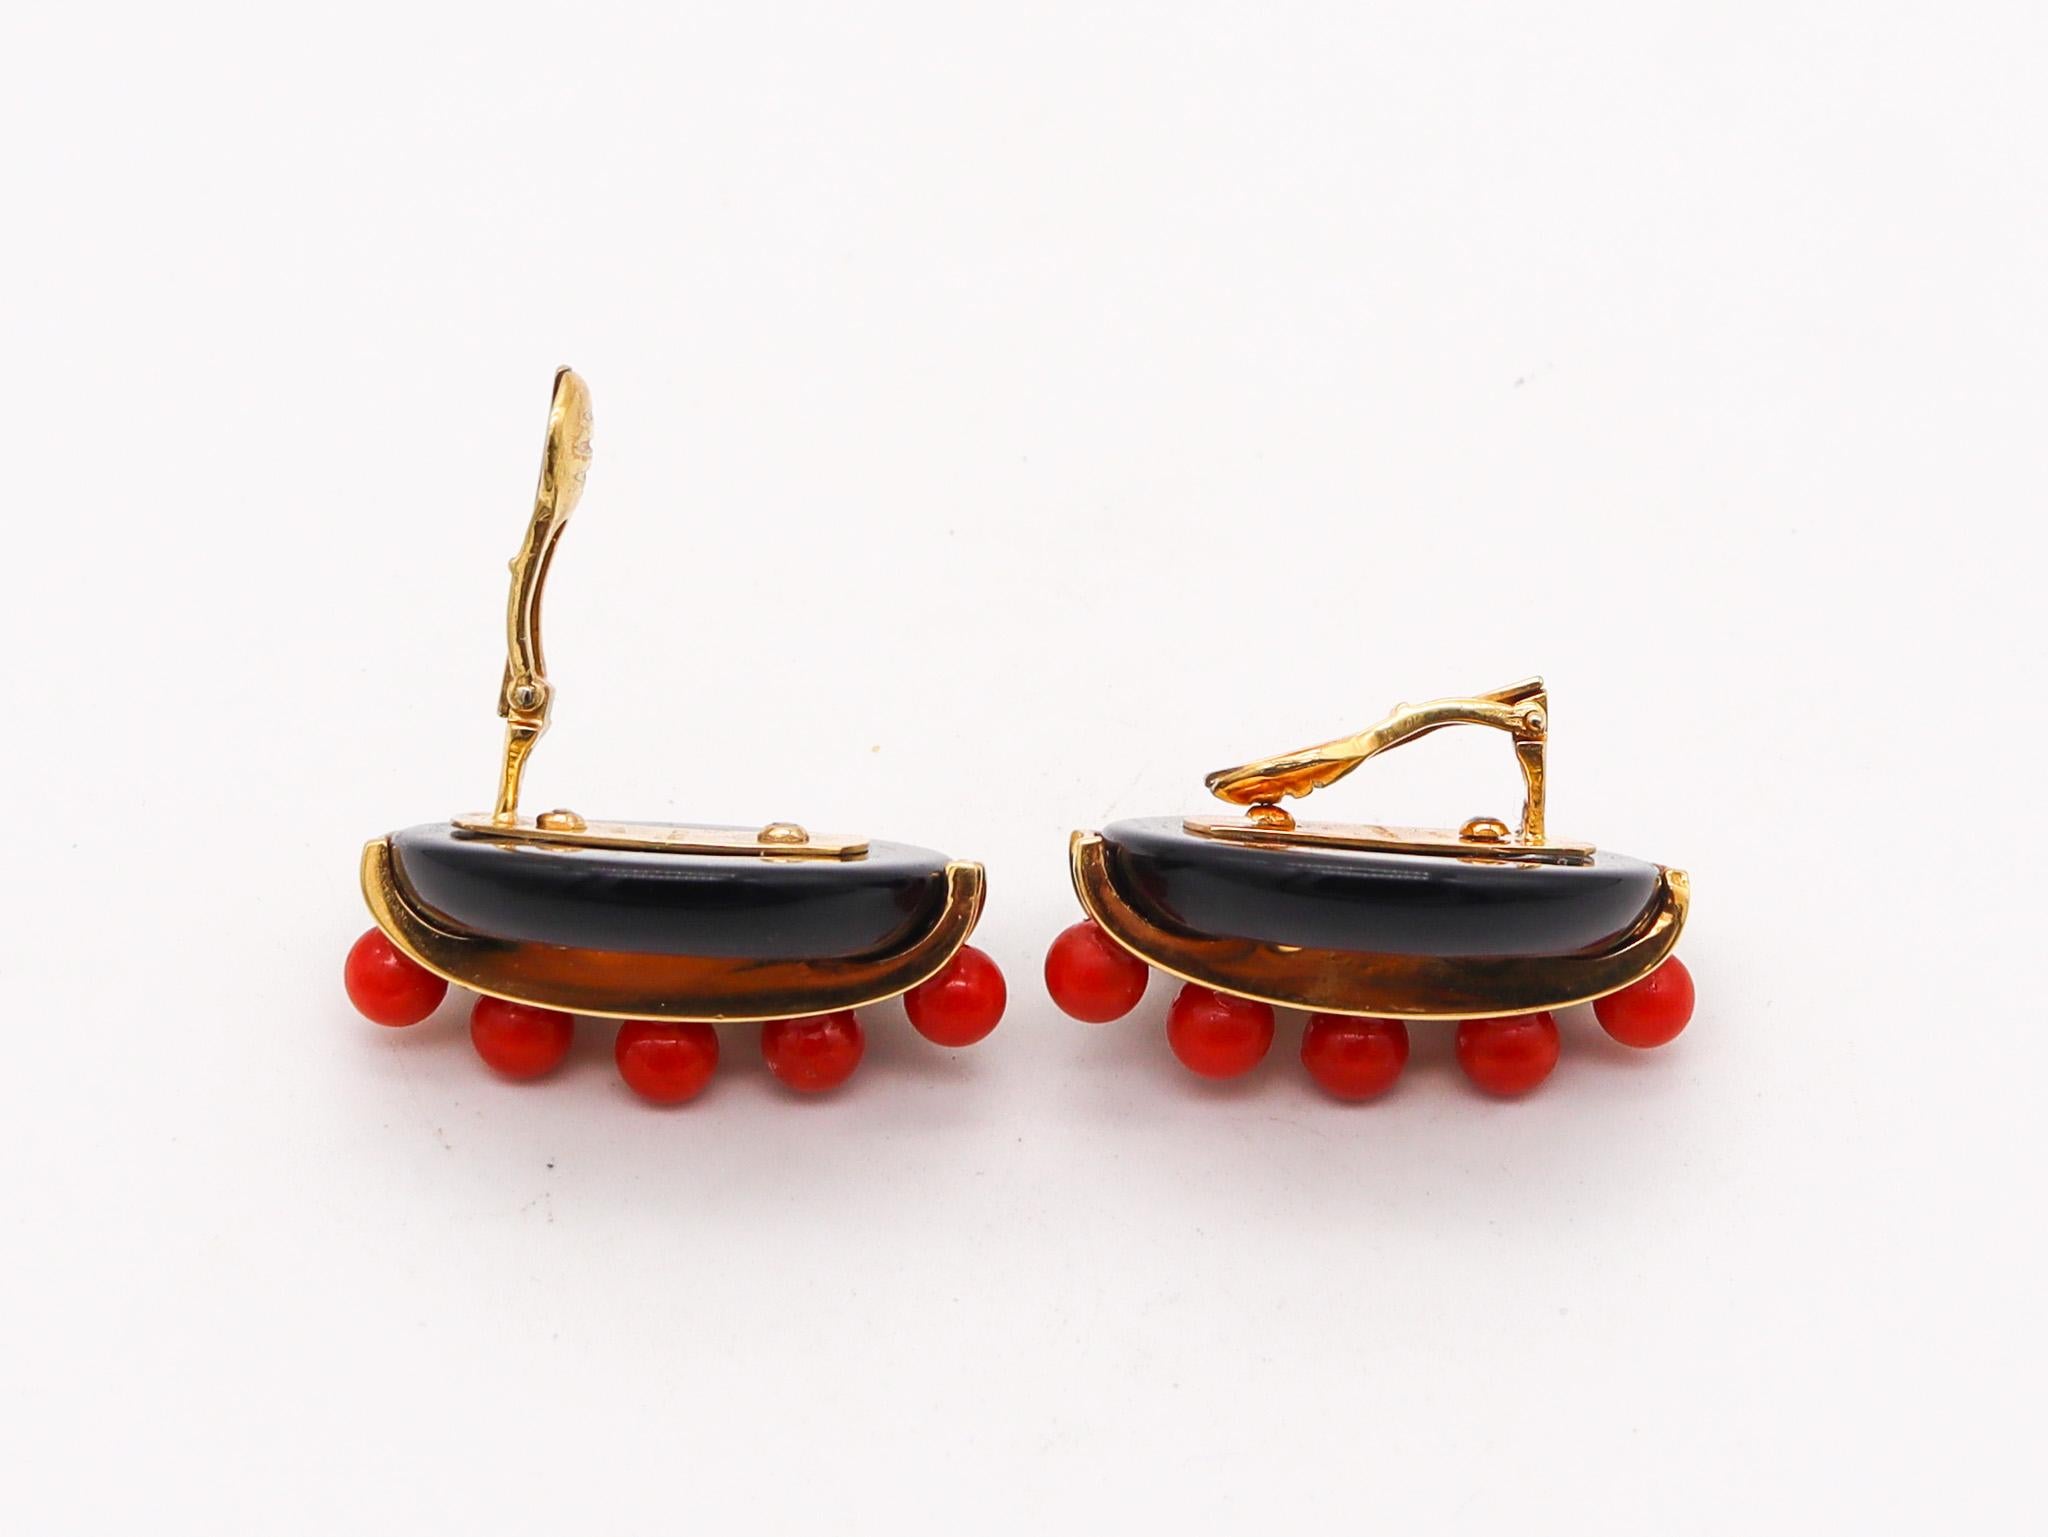 Modernist Cartier 1974 Aldo Cipullo Sculptural Earrings 18Kt Yellow Gold With Onyx & Coral For Sale